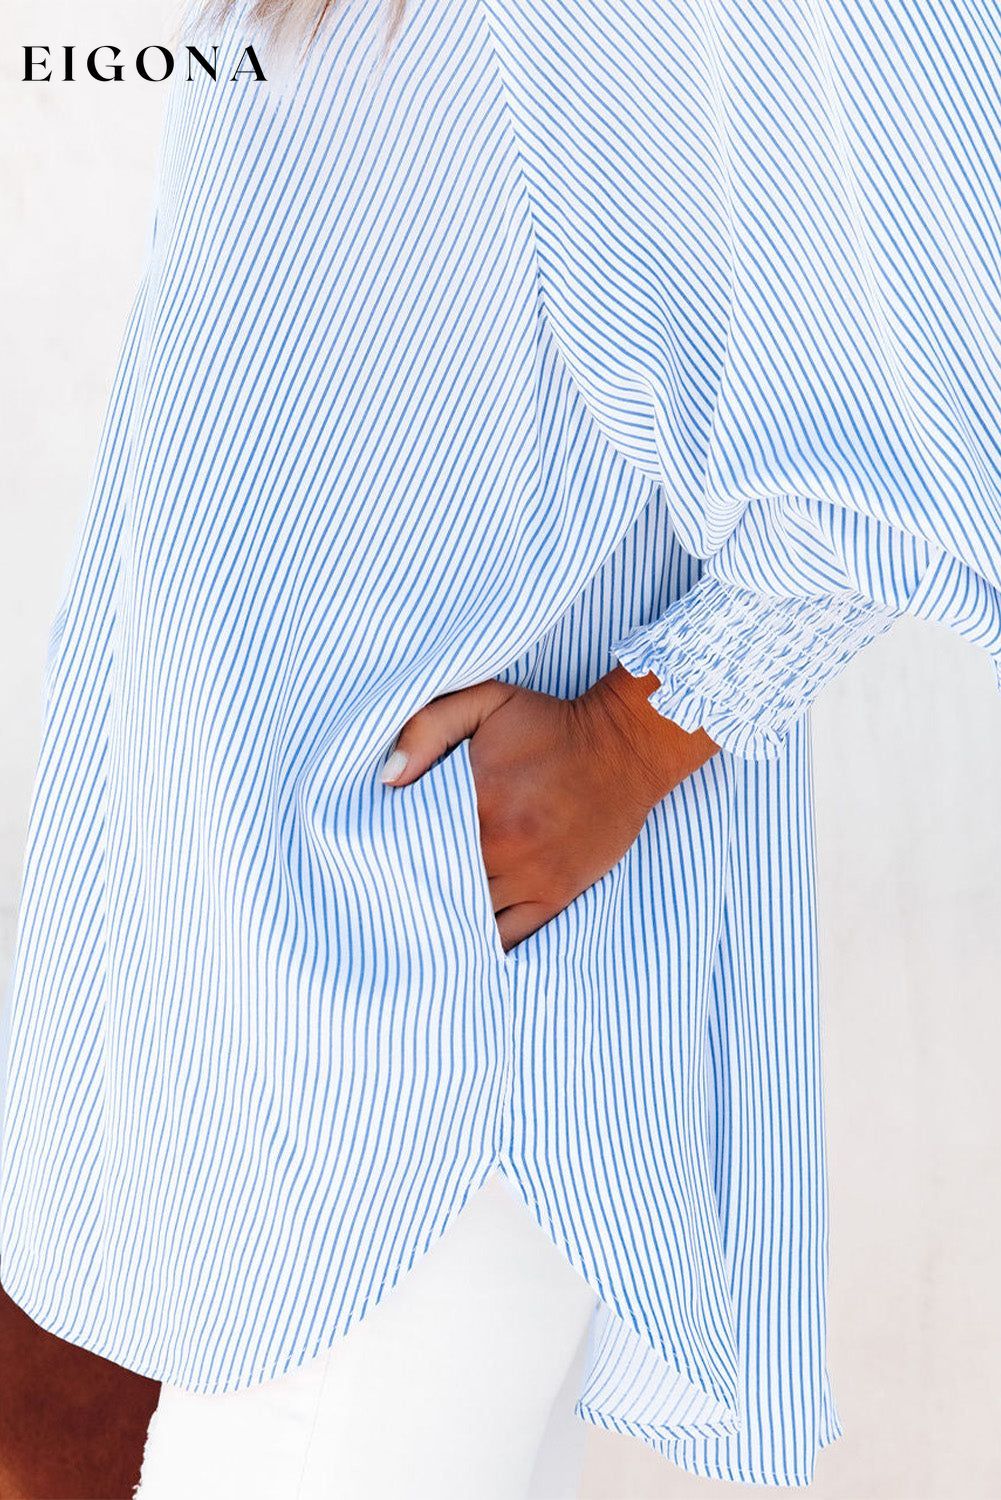 Sky Blue Smocked Cuffed Striped Boyfriend Shirt with Pocket All In Stock Best Sellers clothes Craft Smocked Early Fall Collection long sleeve shirt long sleeve shirts long sleeve top long sleeve tops Occasion Daily Print Stripe Season Spring shirt shirts Sleeve Puff sleeve Stripe tops Style Modern top tops